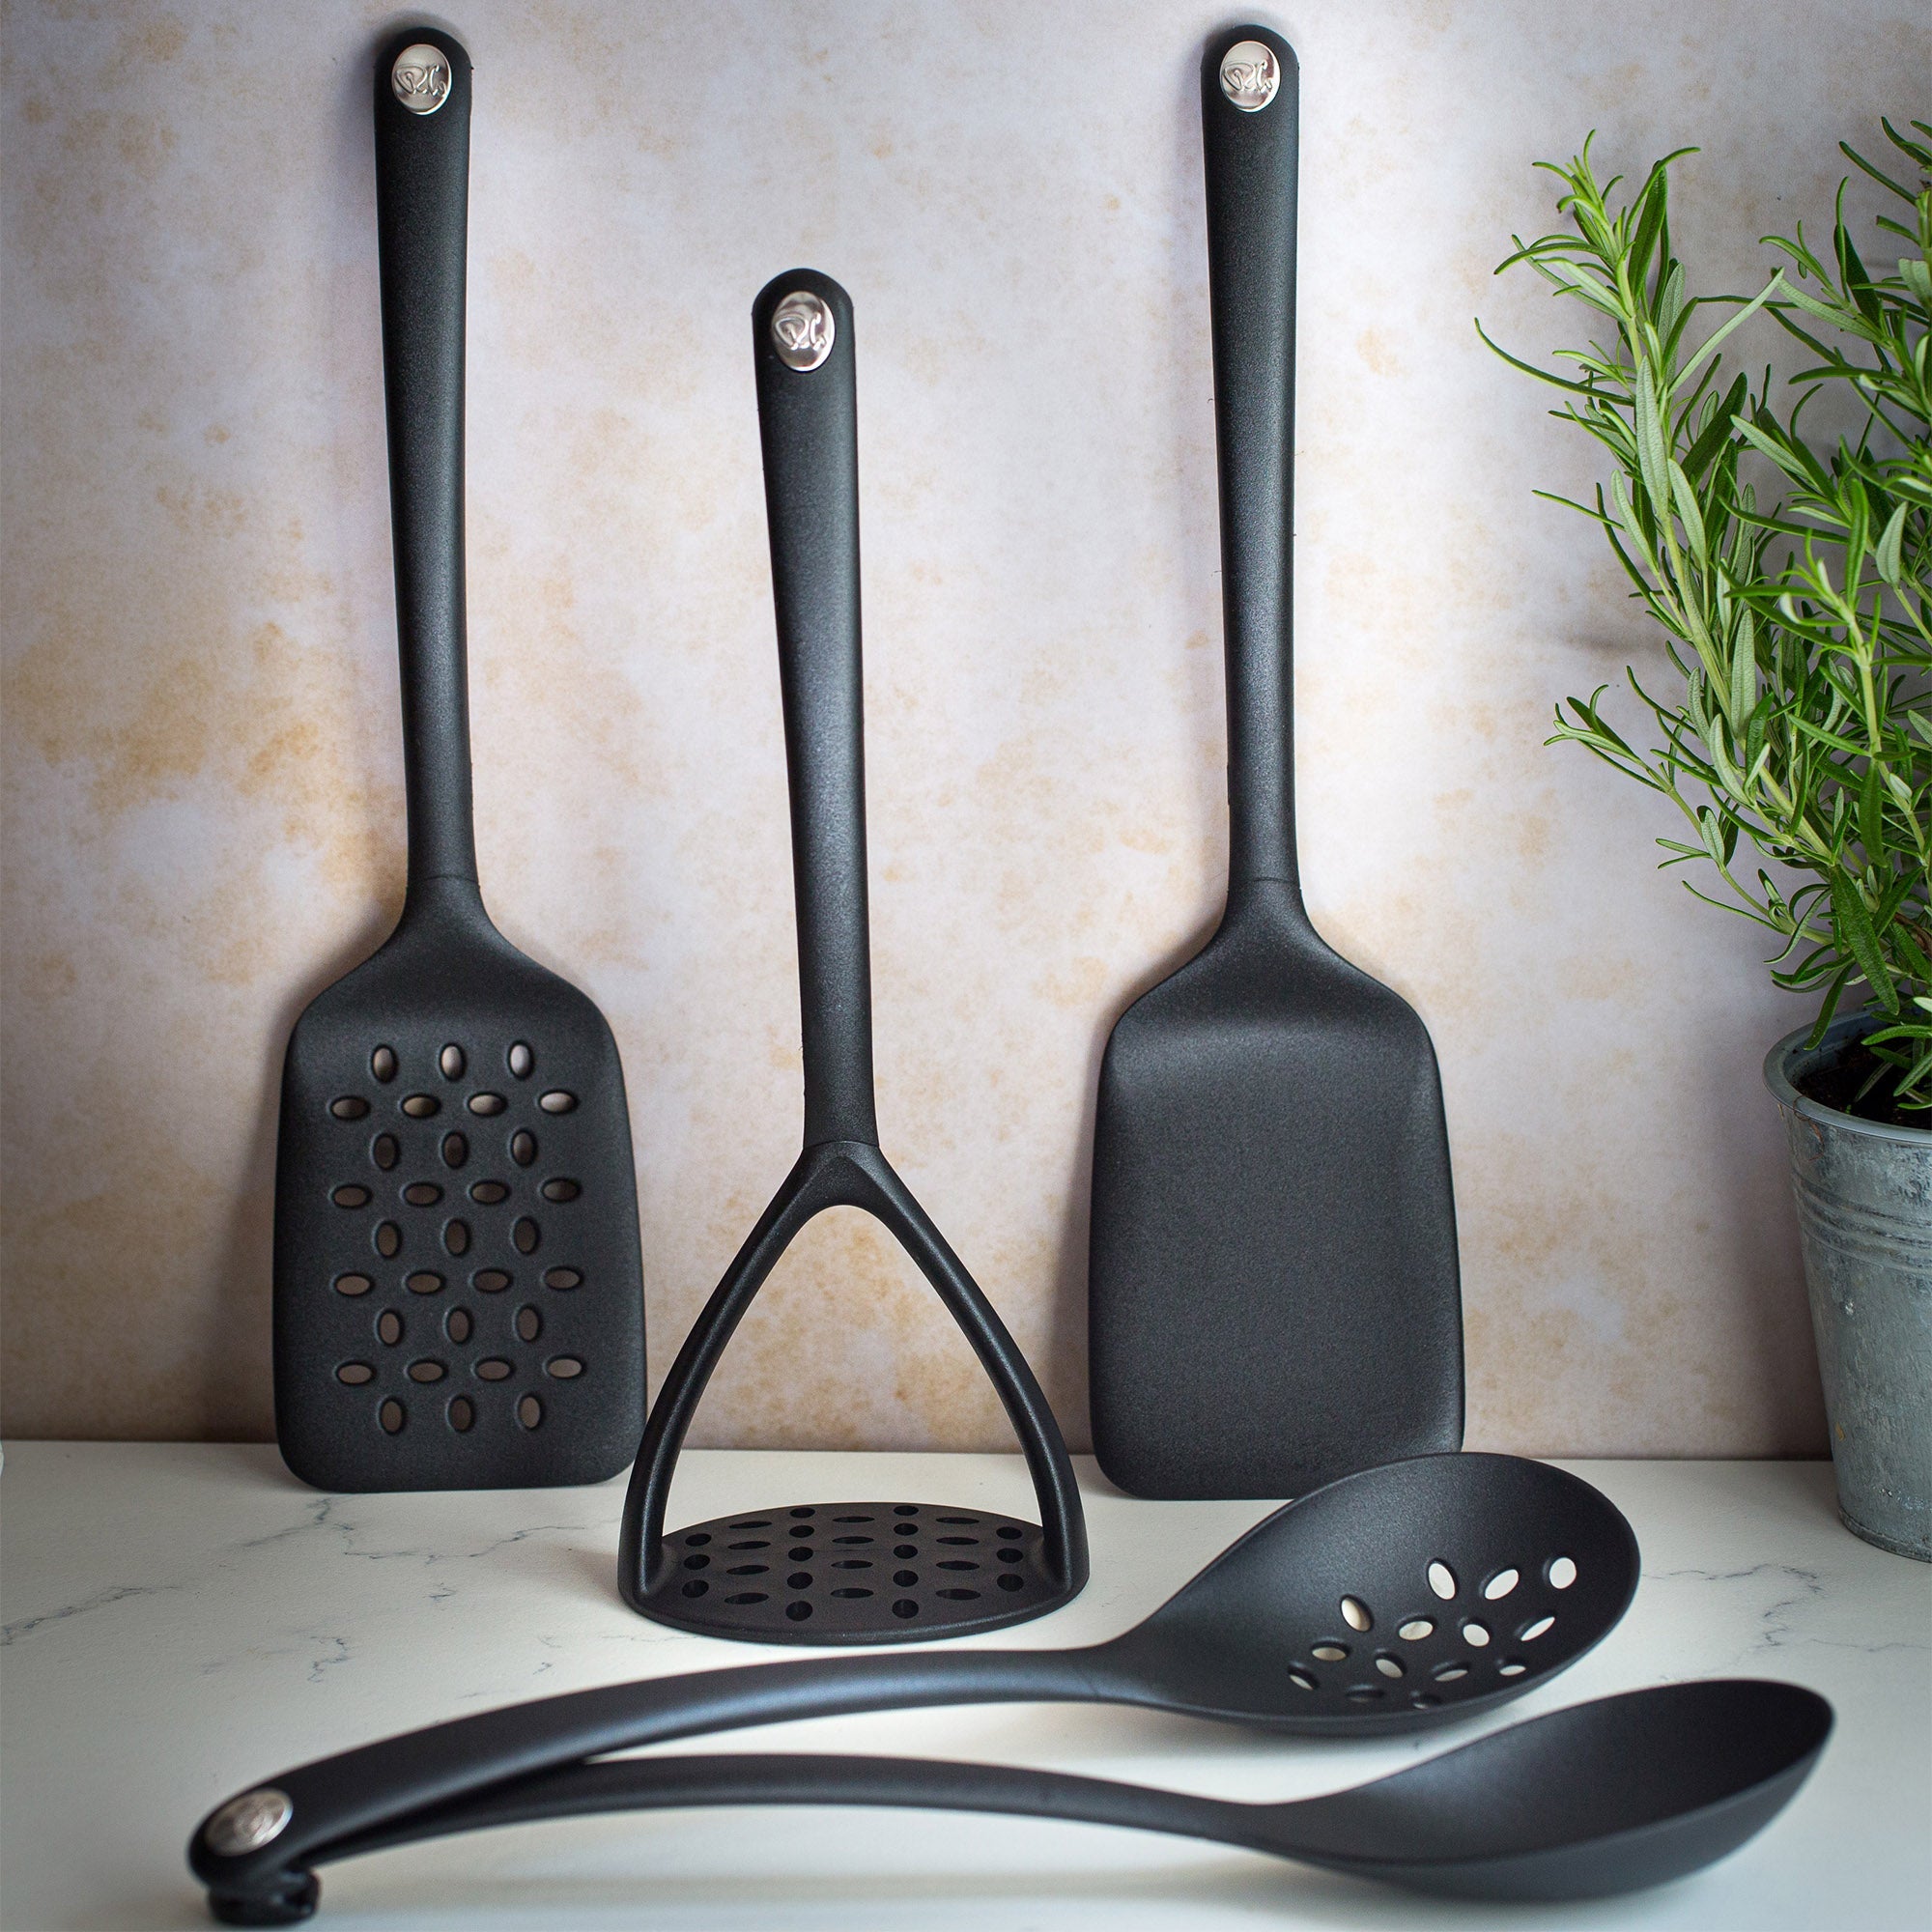 Non-Scratch cooking utensil (set of 5)